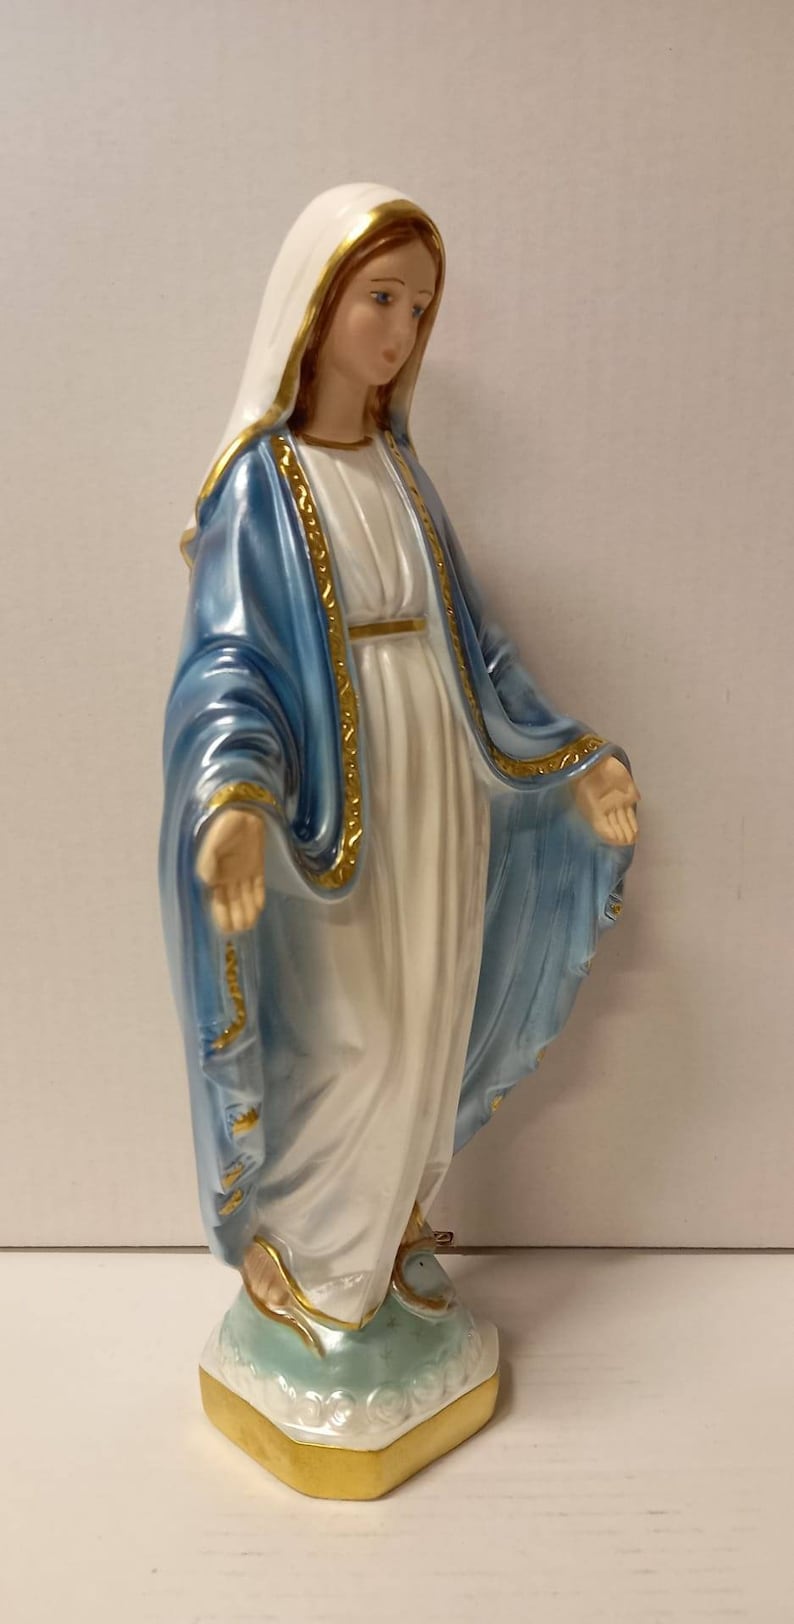 Statue of the Miraculous Madonna Cm 22 8.66 Inches in | Etsy